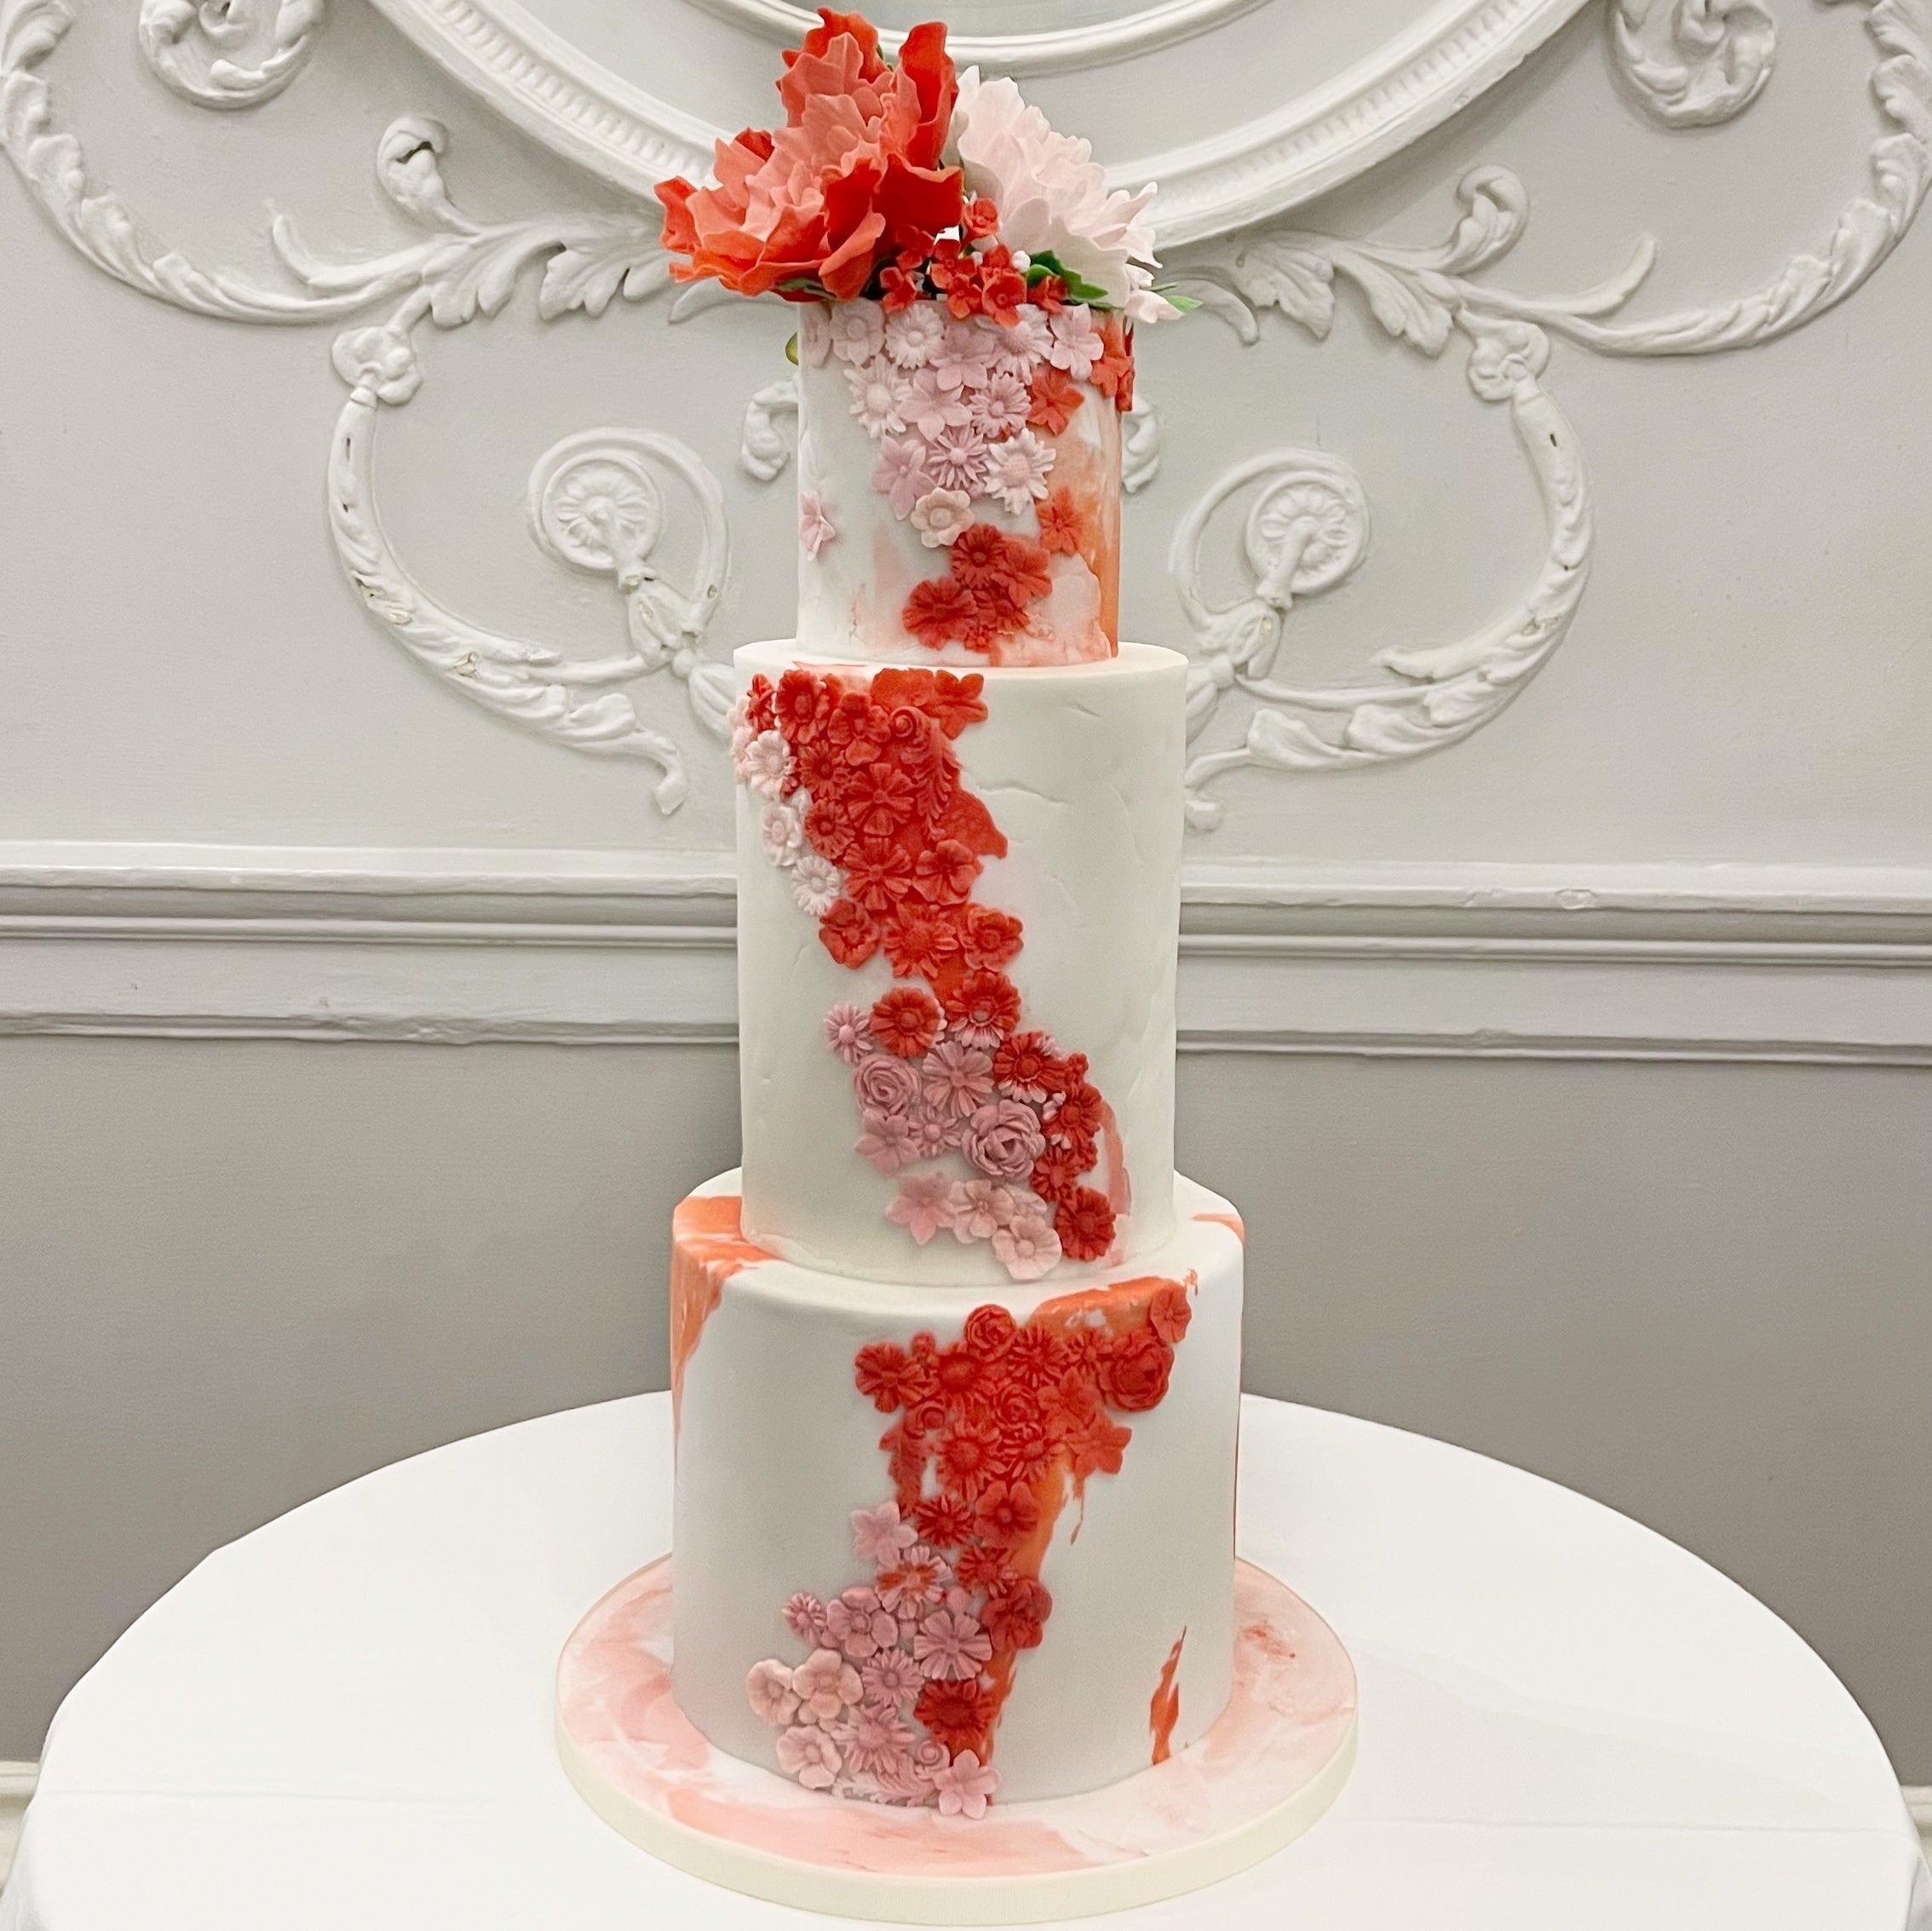 Classic Wedding Cake Red White Colors Stock Photo 725978839 | Shutterstock